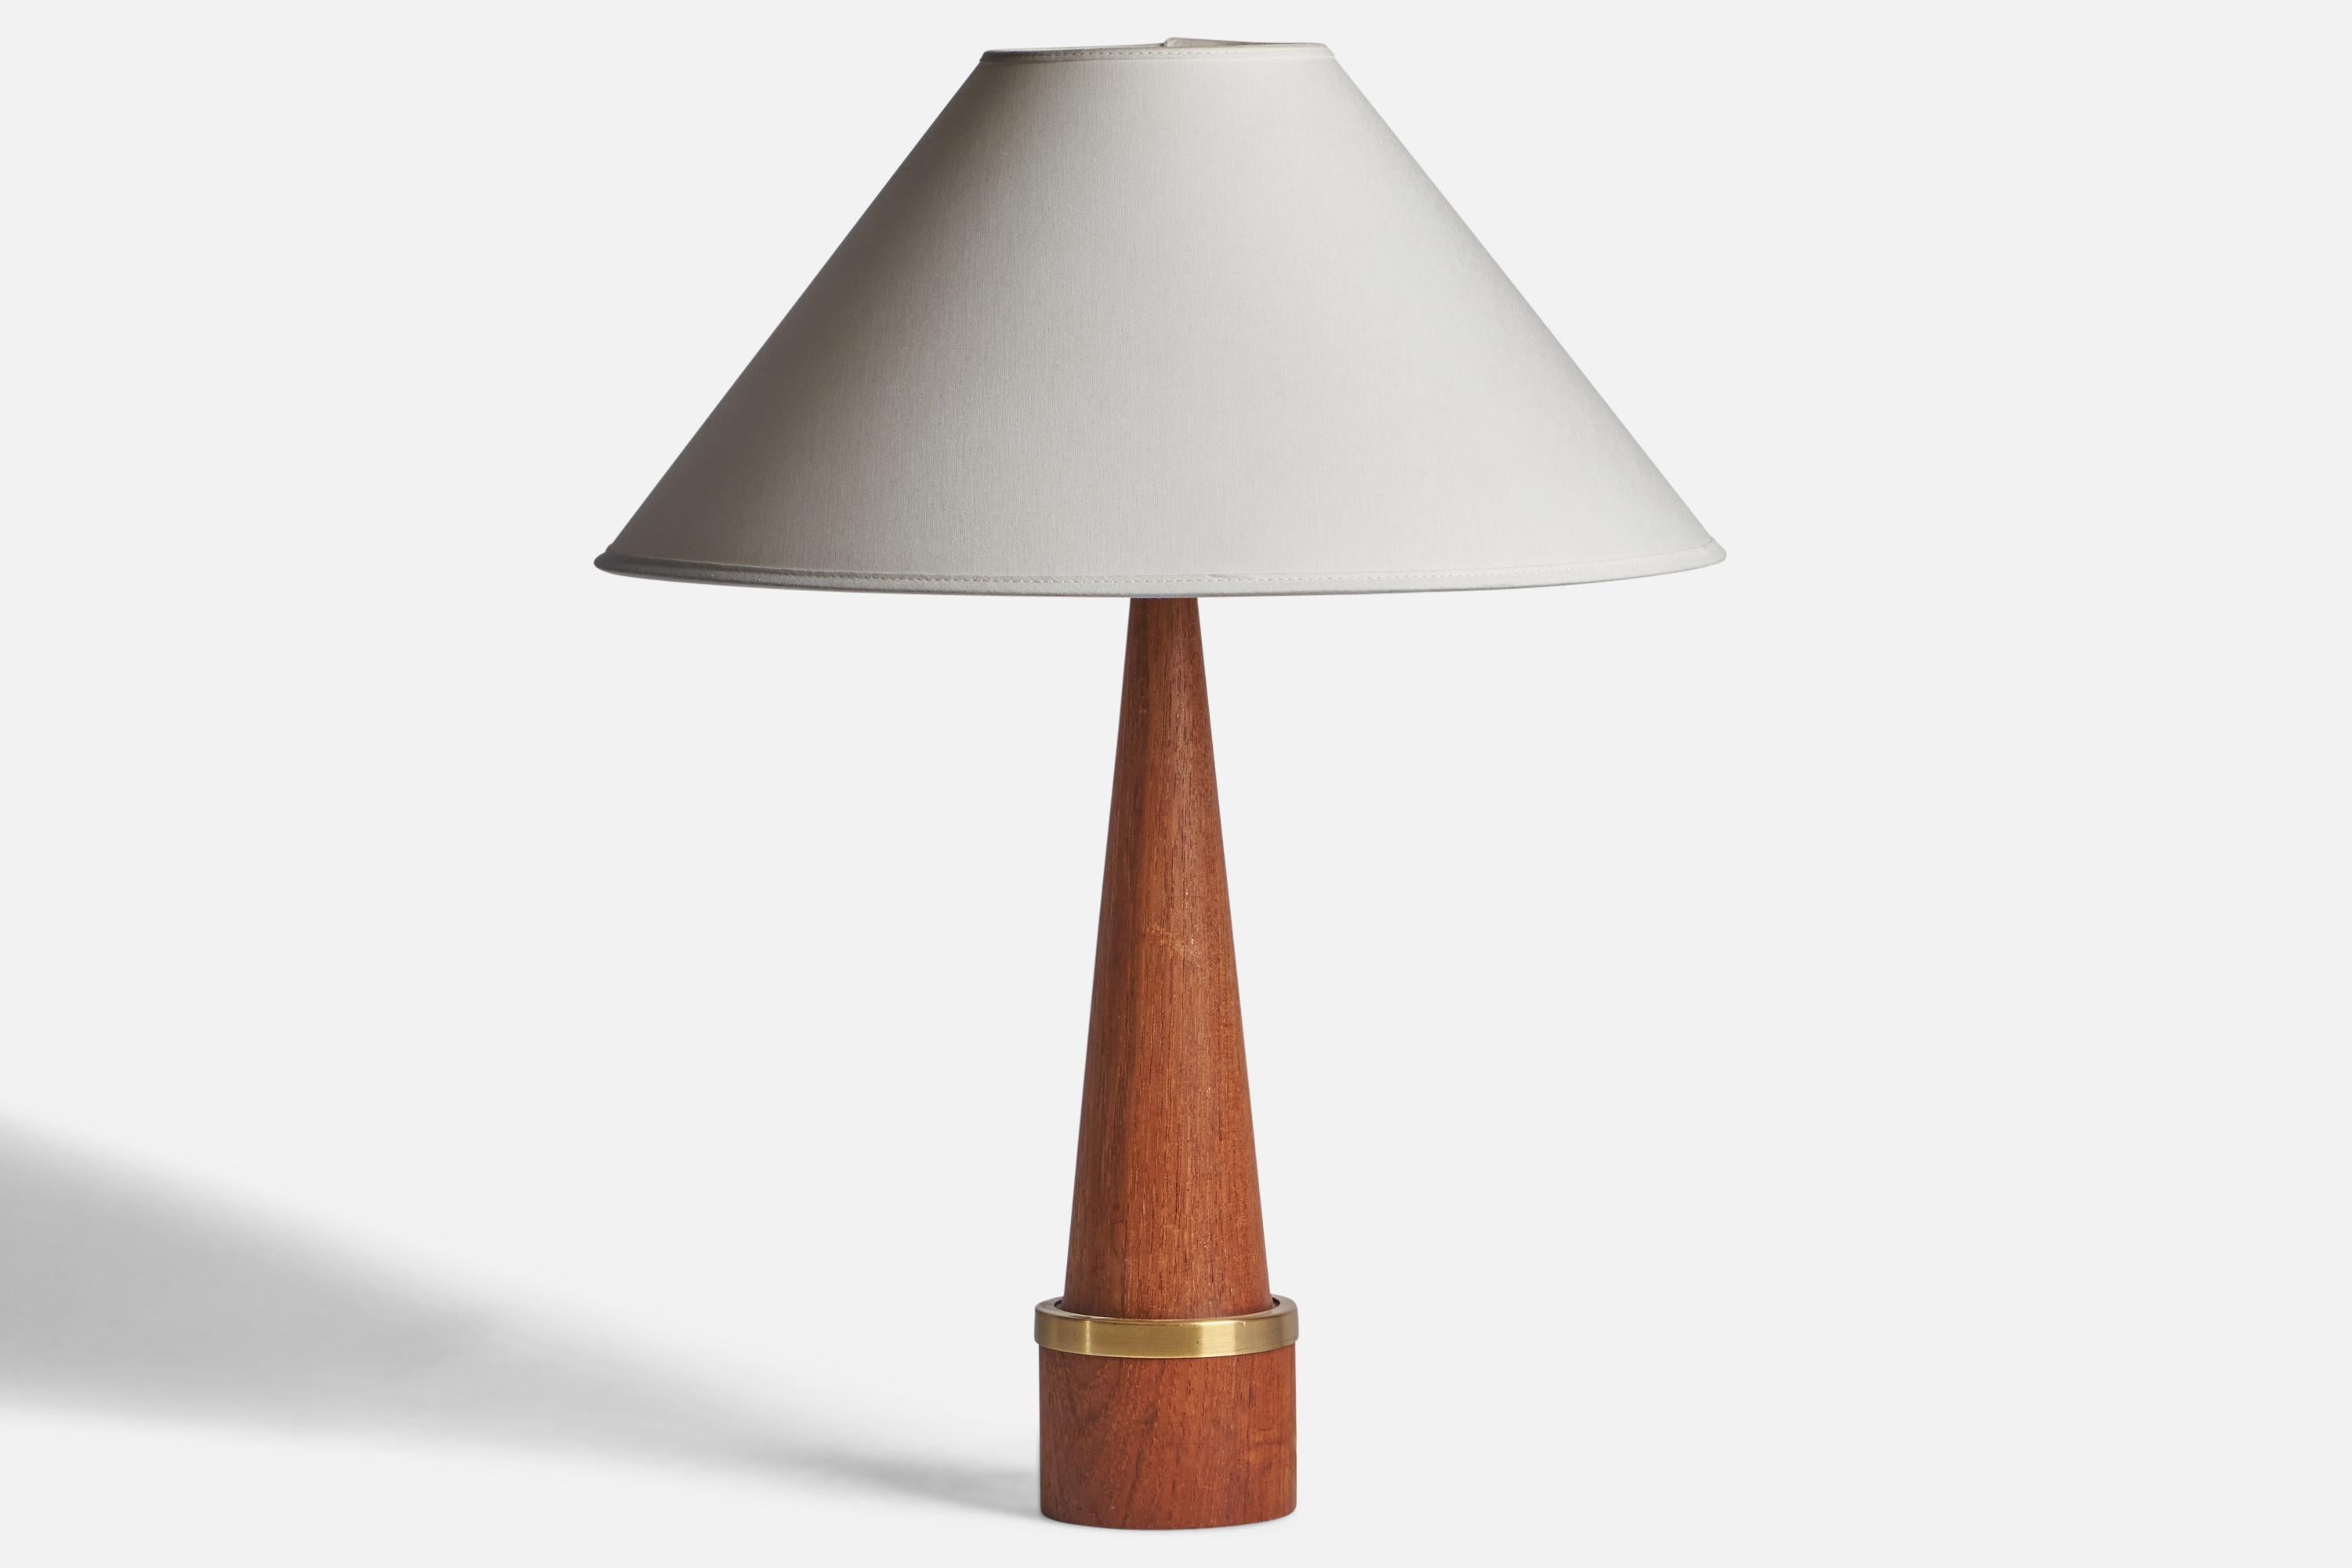 A teak and brass table lamp designed and produced in Denmark, c. 1950s.

Dimensions of Lamp (inches): 16.5” H x 3.8” Diameter
Dimensions of Shade (inches): 4.5” Top Diameter x 16” Bottom Diameter x 7.25” H
Dimensions of Lamp with Shade (inches):